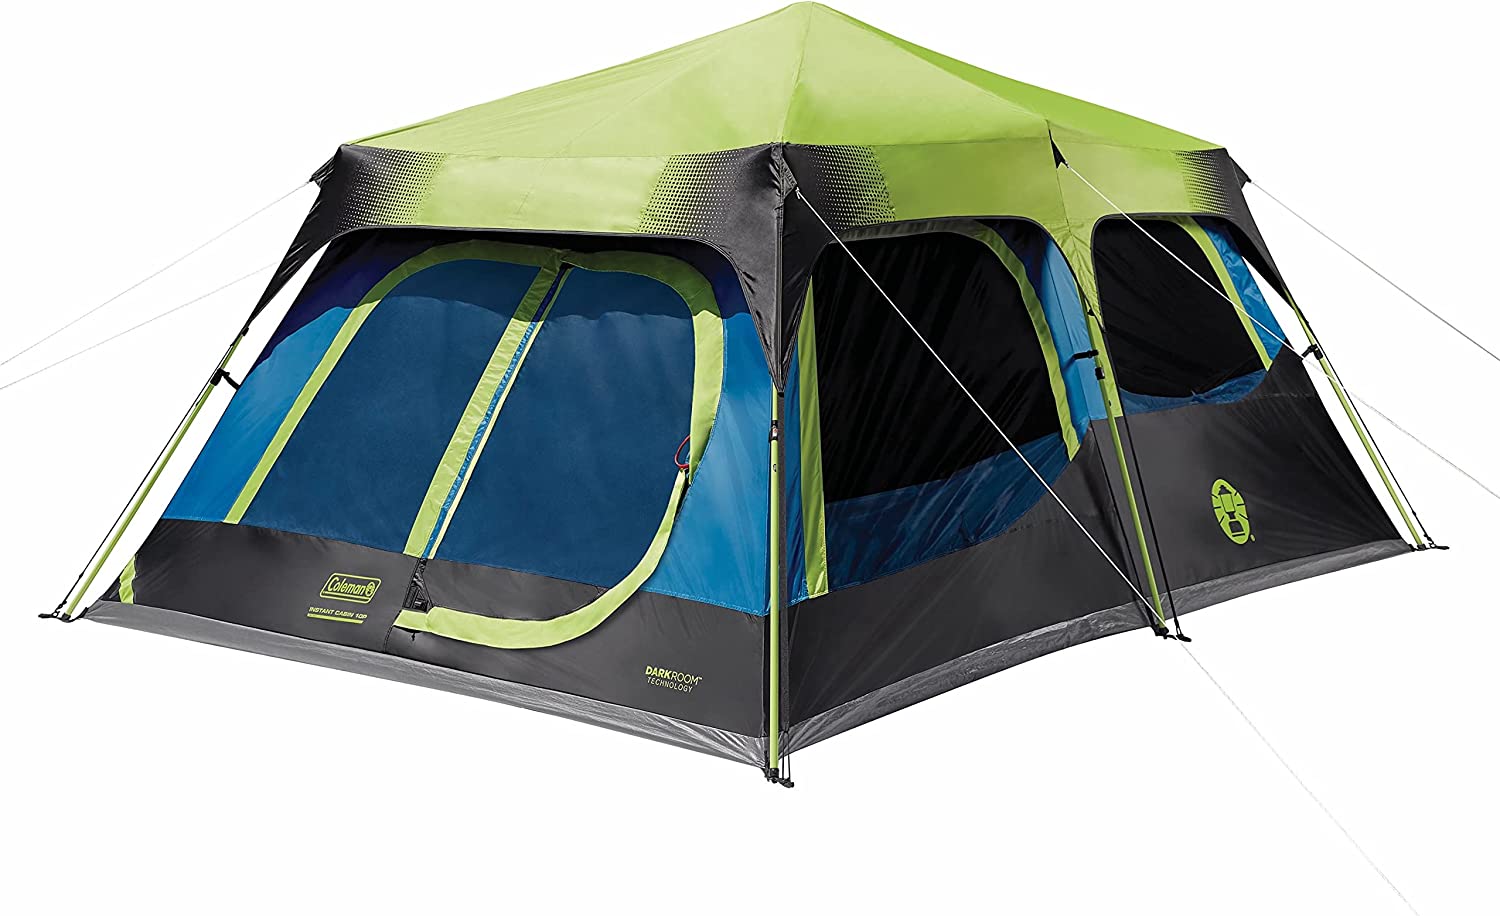  6. Coleman Cabin Tent for 4 person 